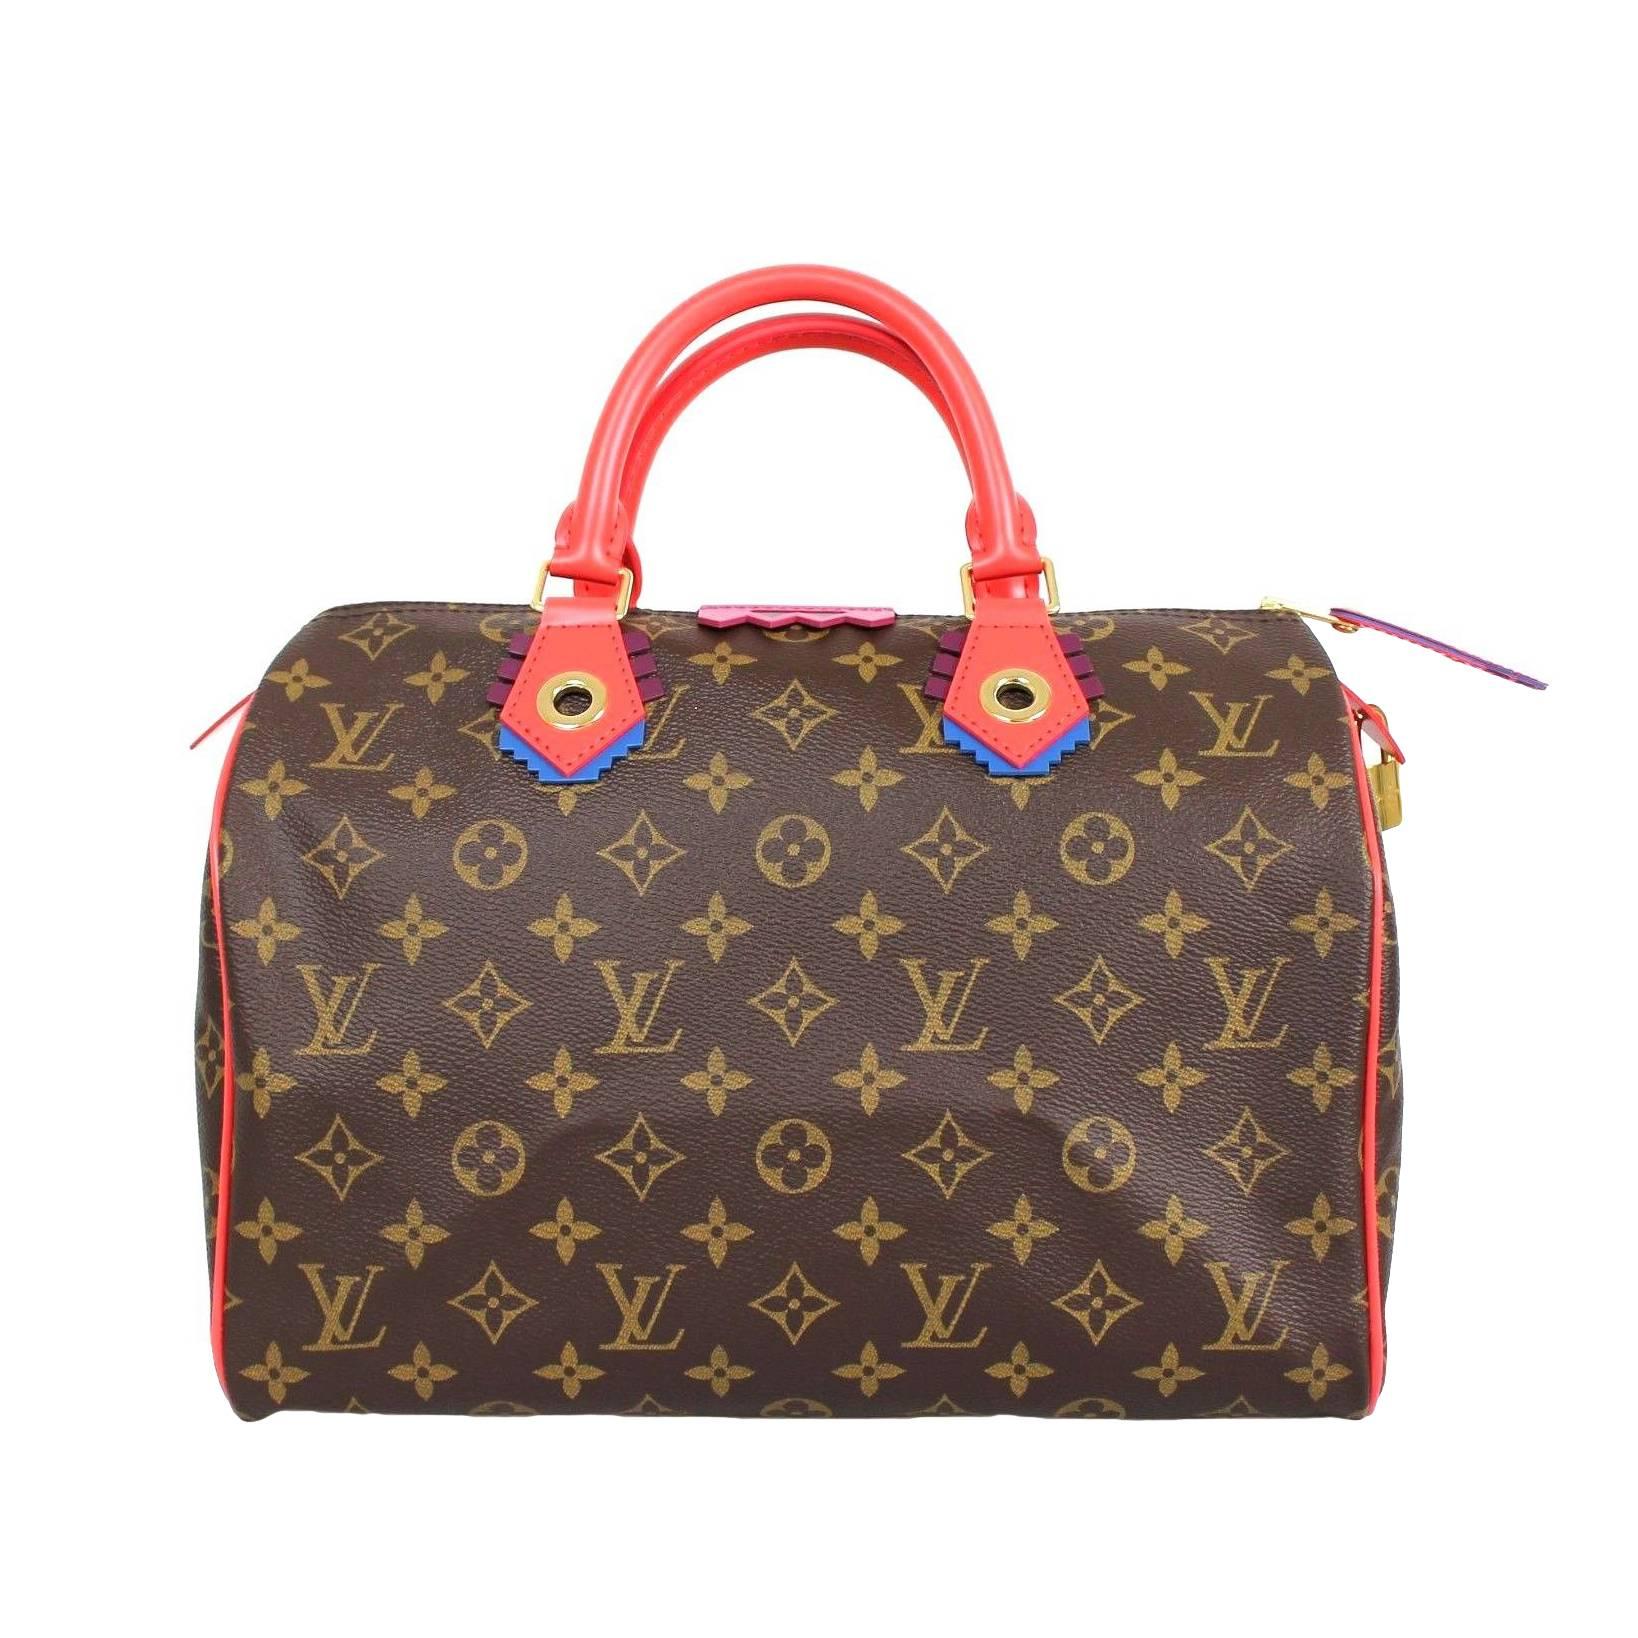 Louis Vuitton Monogram Canvas Gold HDW 2015 Limited Edition  Speedy 30 Tote Bag For Sale